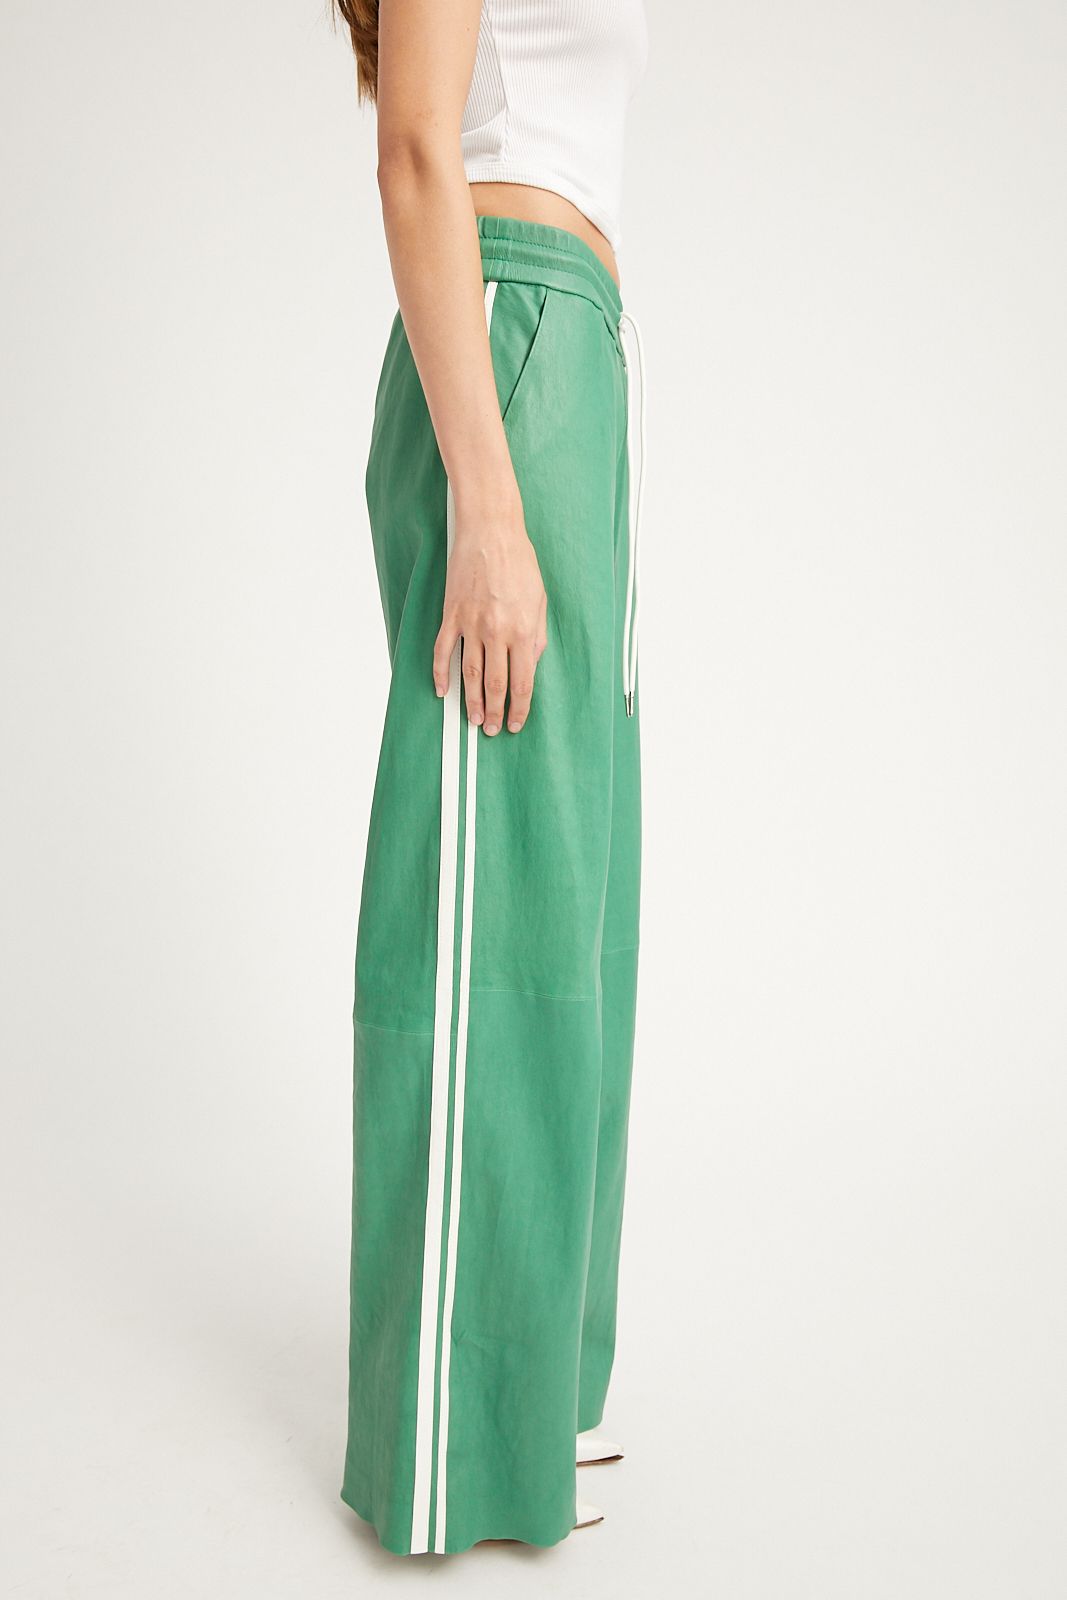 Evergreen Leather Athletic Drawstring Pants